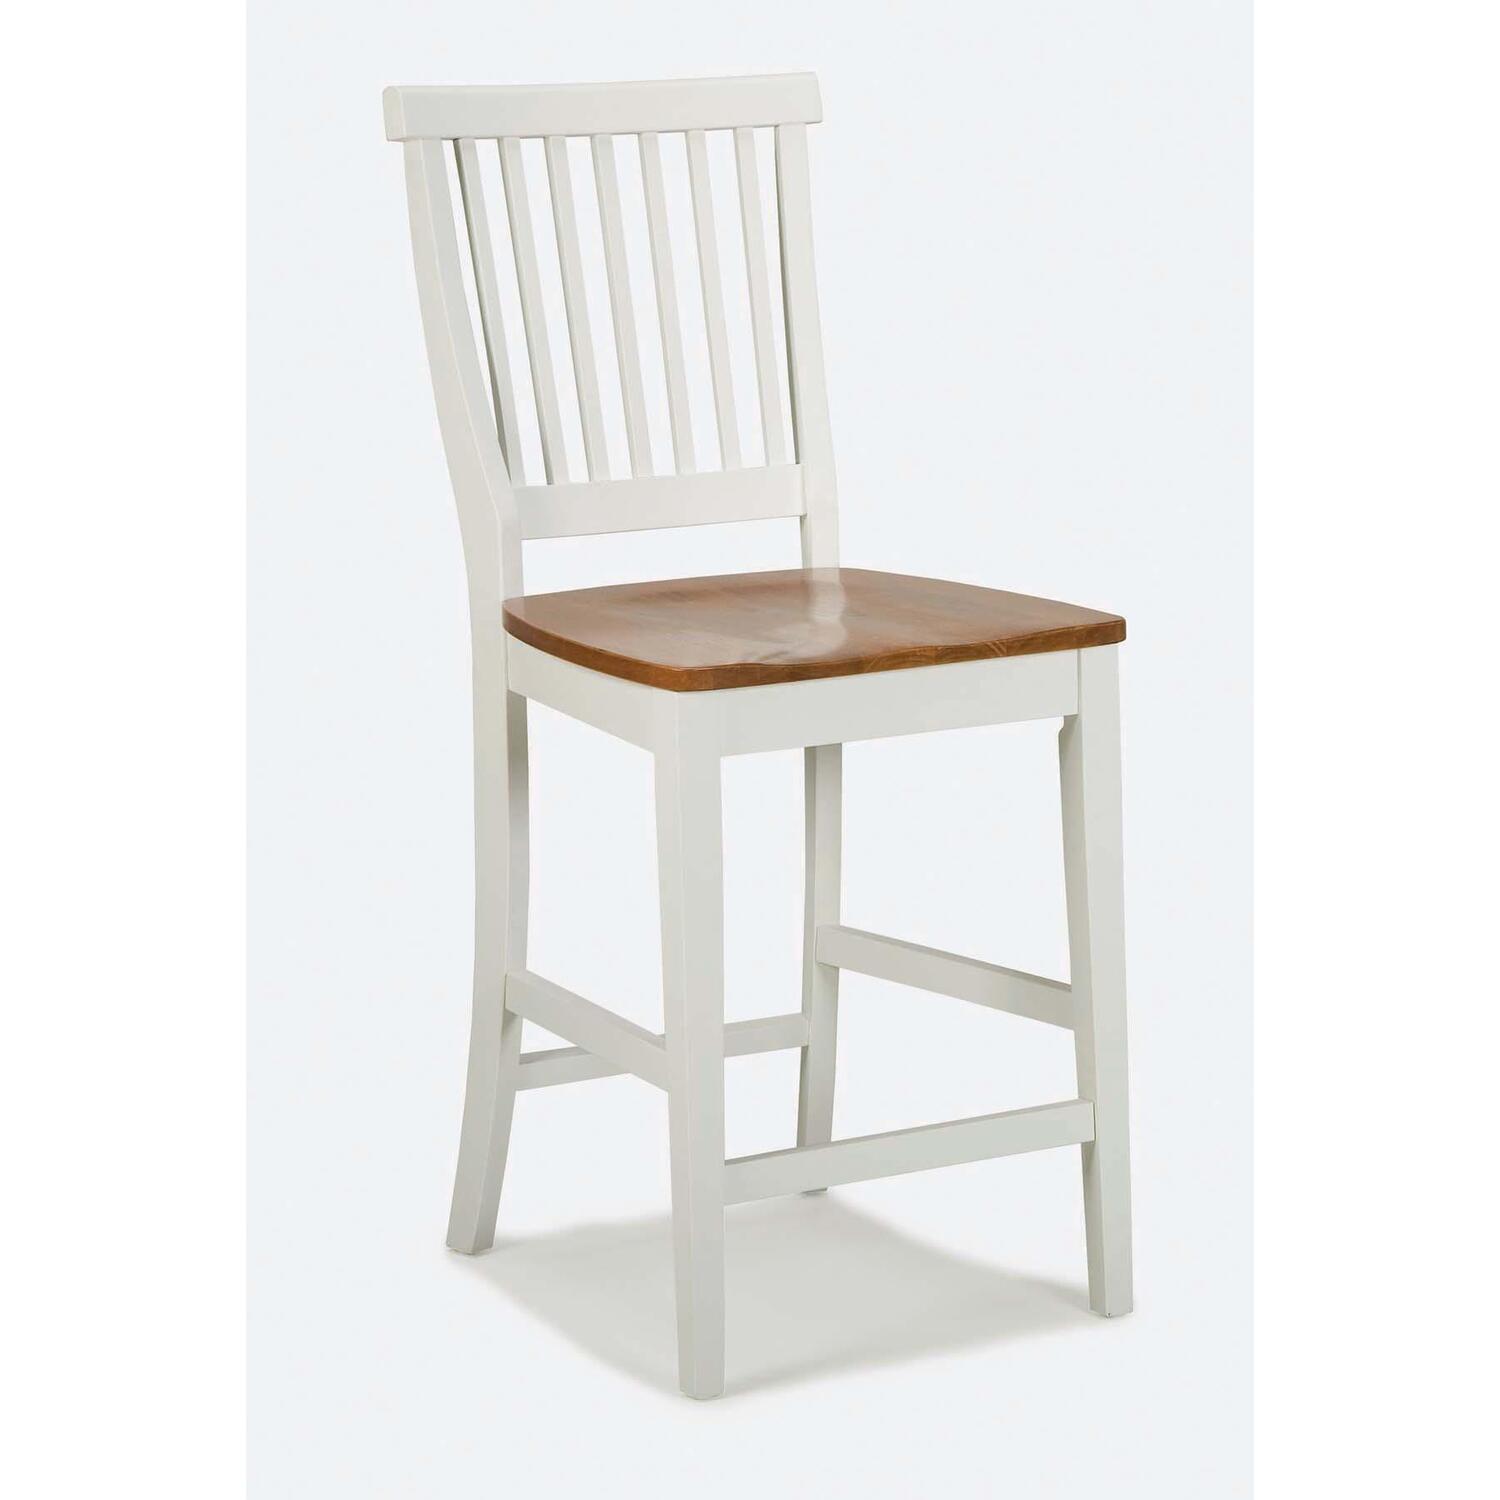 Homestyles Americana Traditional Wood Counter Stool in Antique White and Oak - image 1 of 9